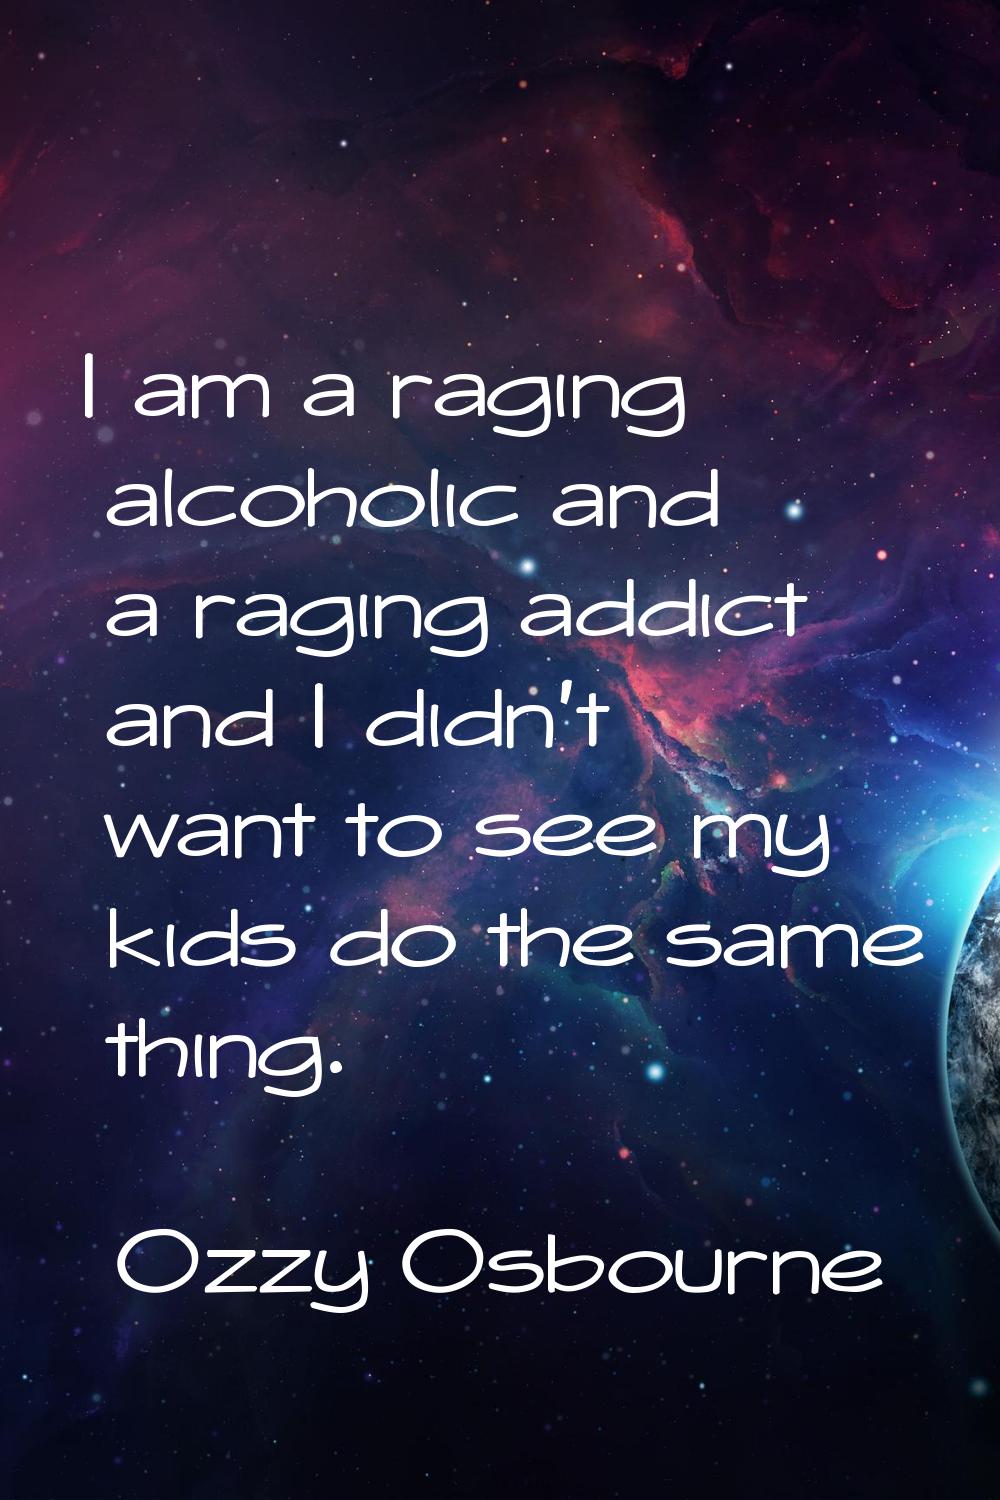 I am a raging alcoholic and a raging addict and I didn't want to see my kids do the same thing.